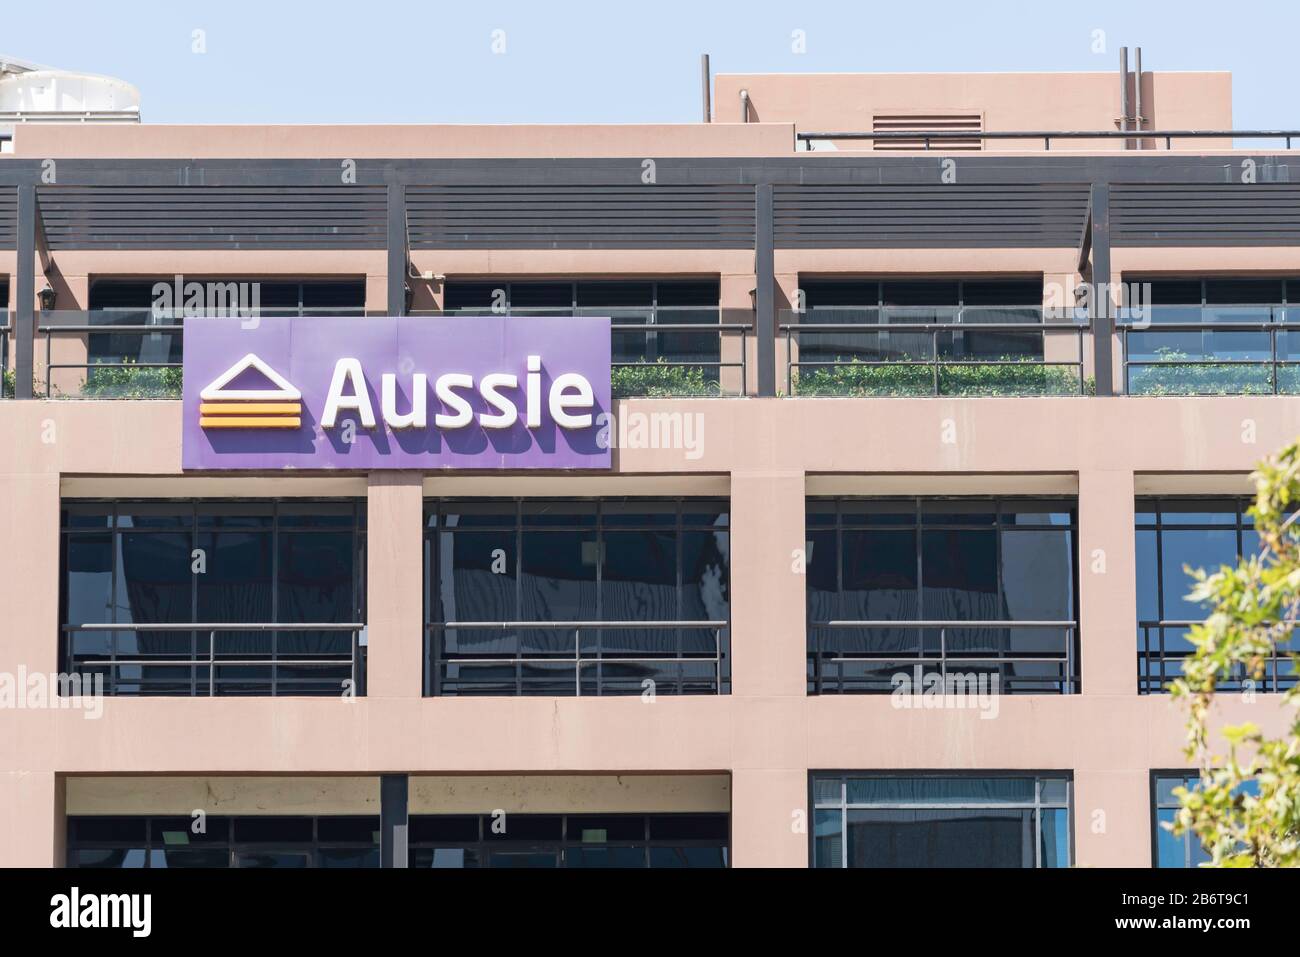 The Aussie Home Loans (Commonwealth Bank of Australia subsidiary) on the side of a building in Parramatta, Sydney, Australia Stock Photo